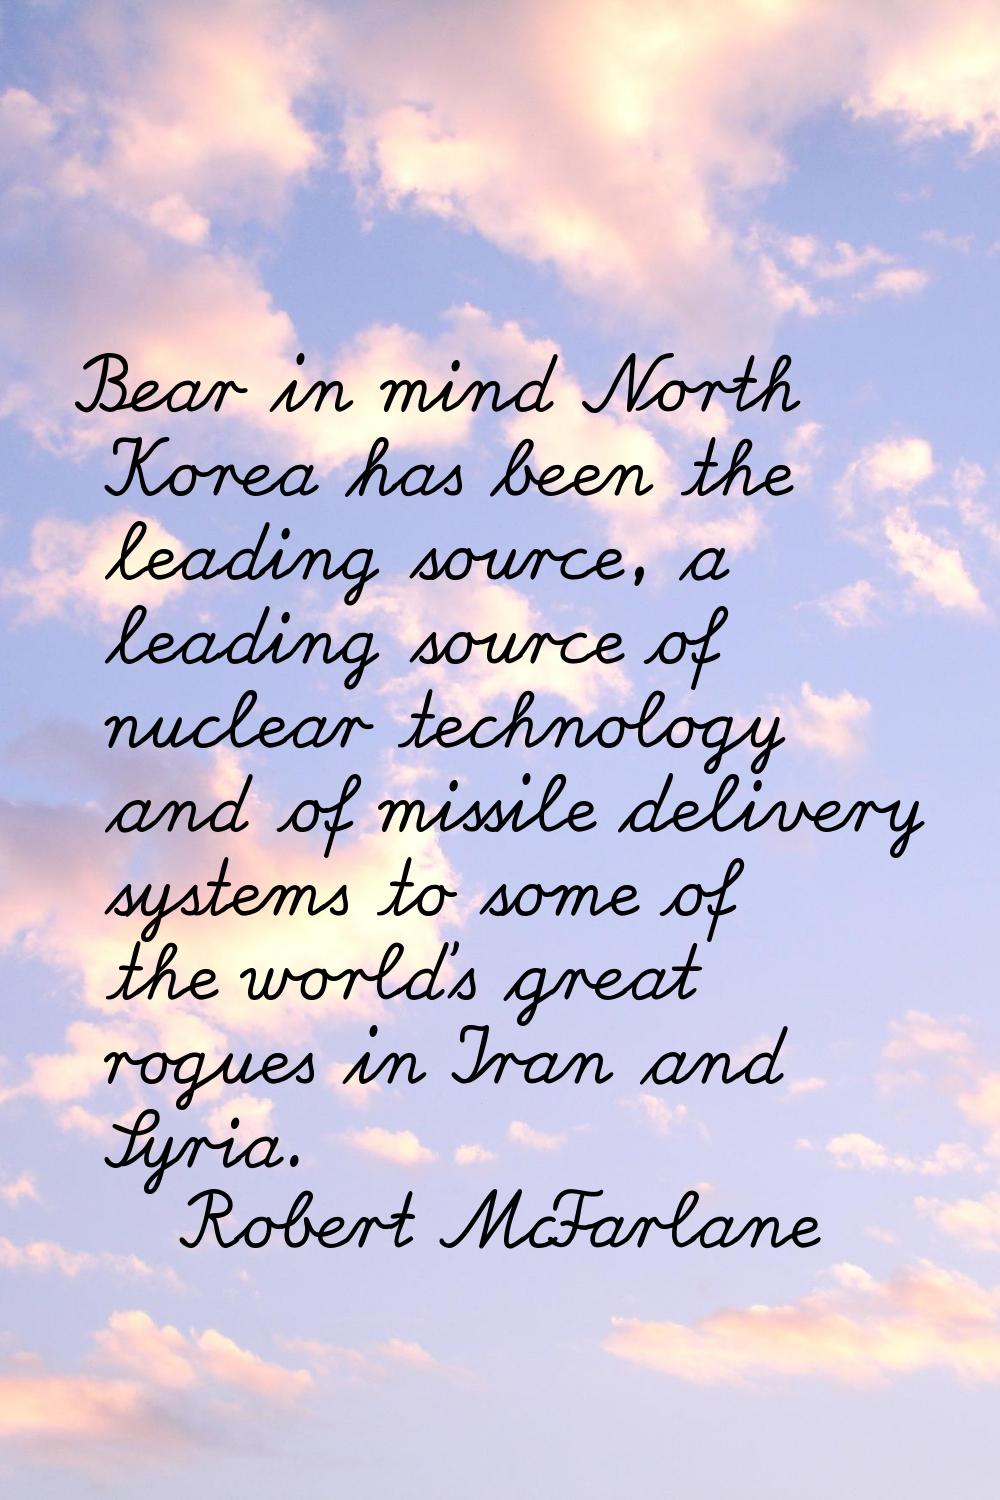 Bear in mind North Korea has been the leading source, a leading source of nuclear technology and of